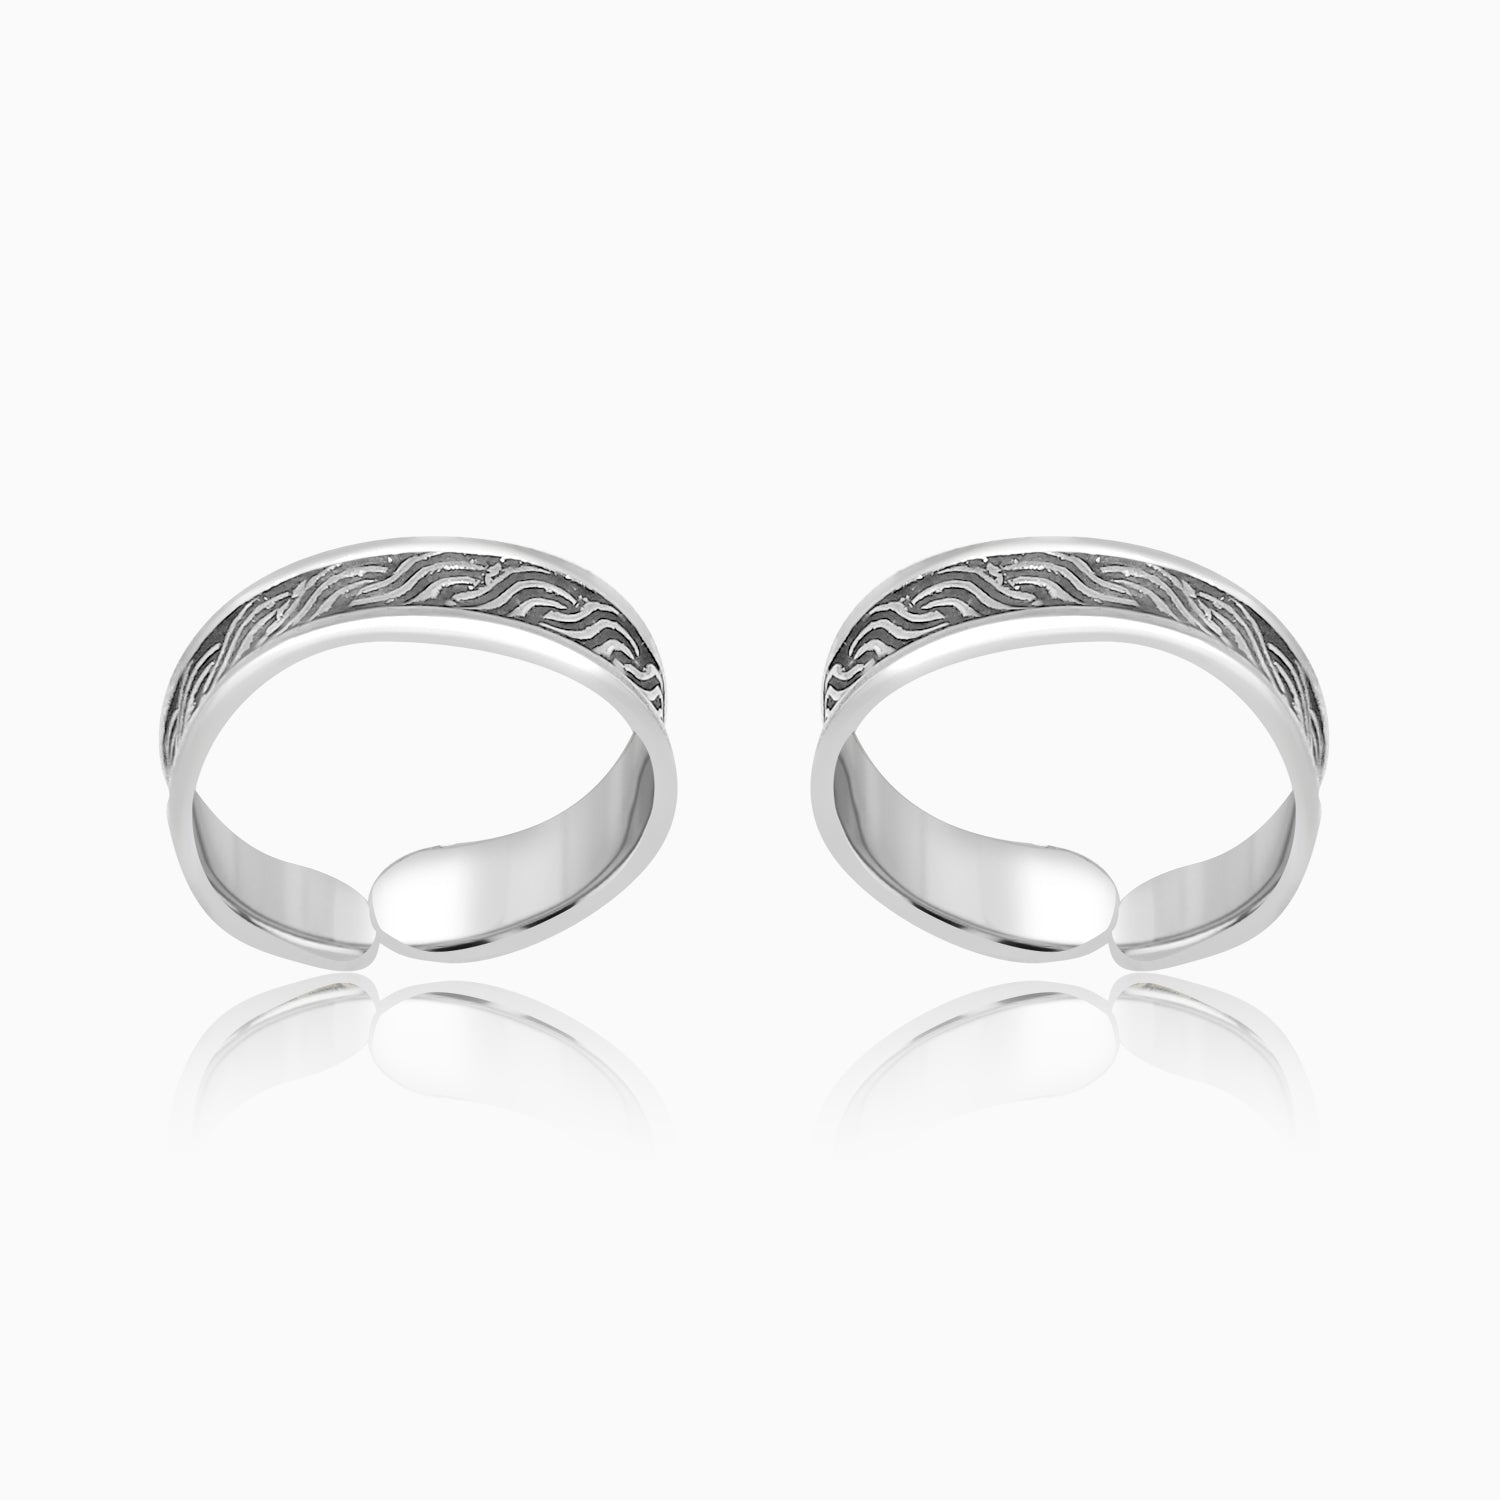 Silver Oxidised Cascading Flow Toe Rings